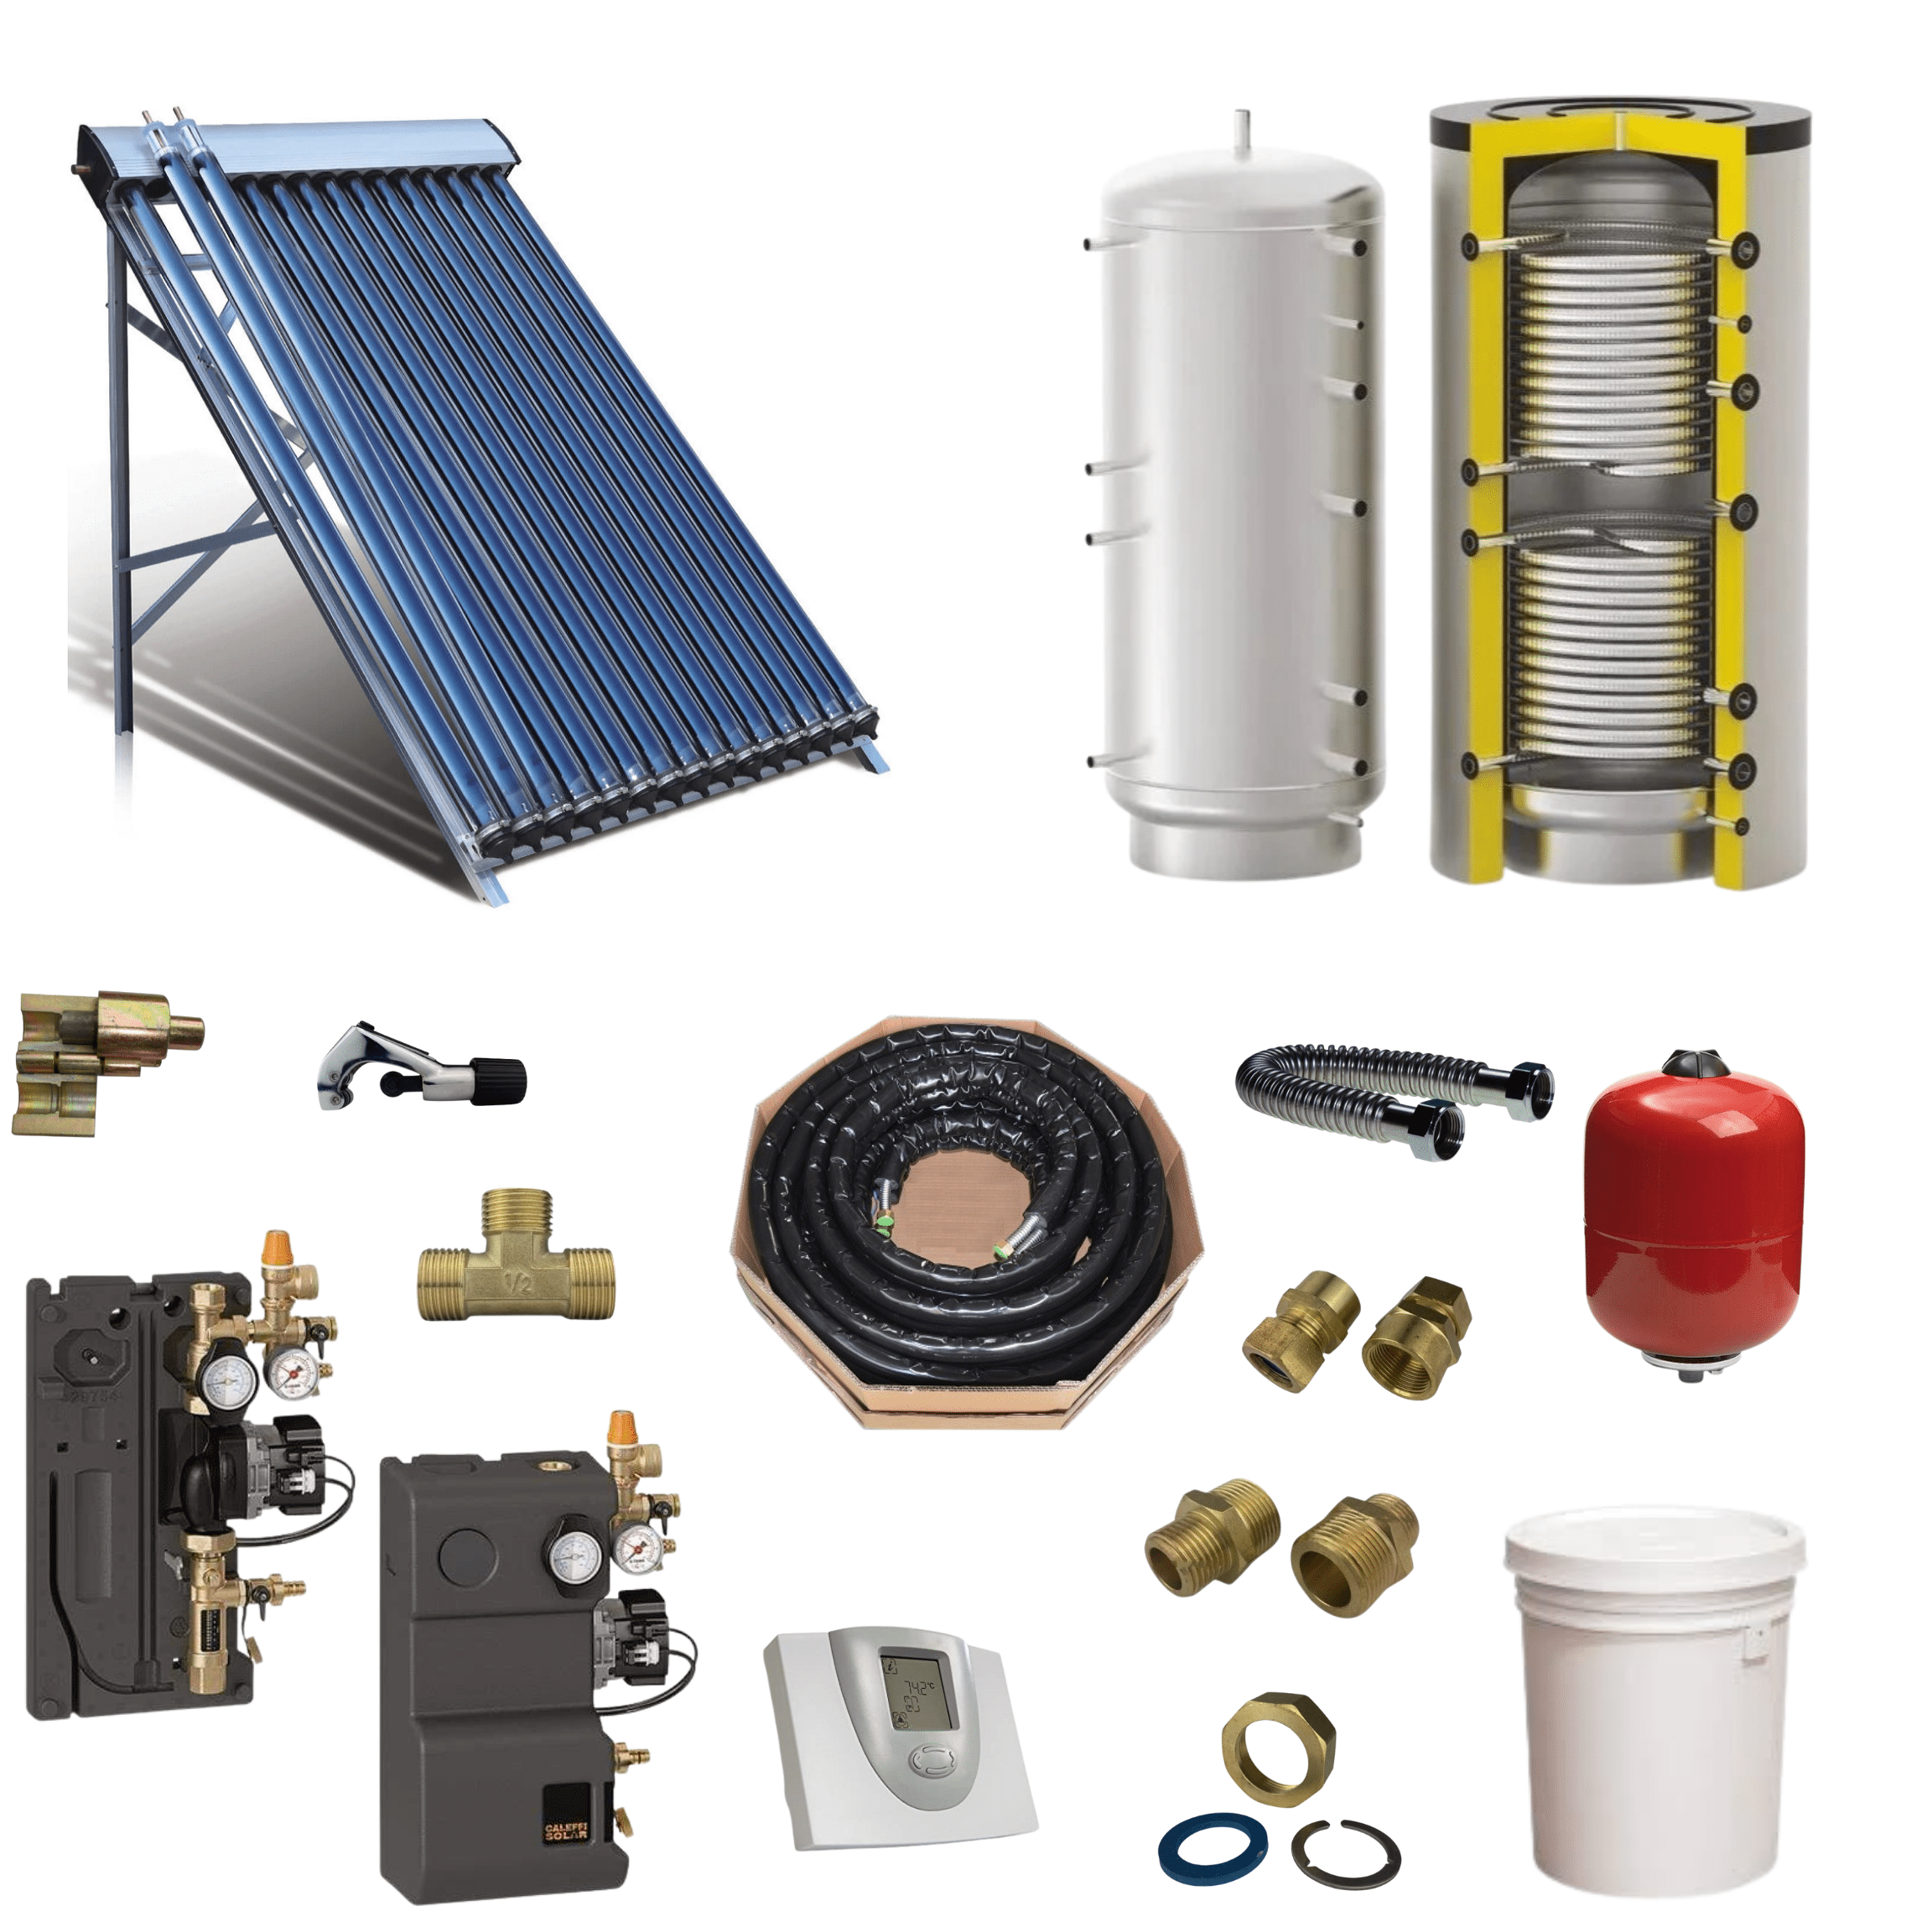 30T_1C_200L_PST_SSA Closed Loop Solar Water heater Kit with 1x30 Tubes Collector, 200L Storage Tank and selected options